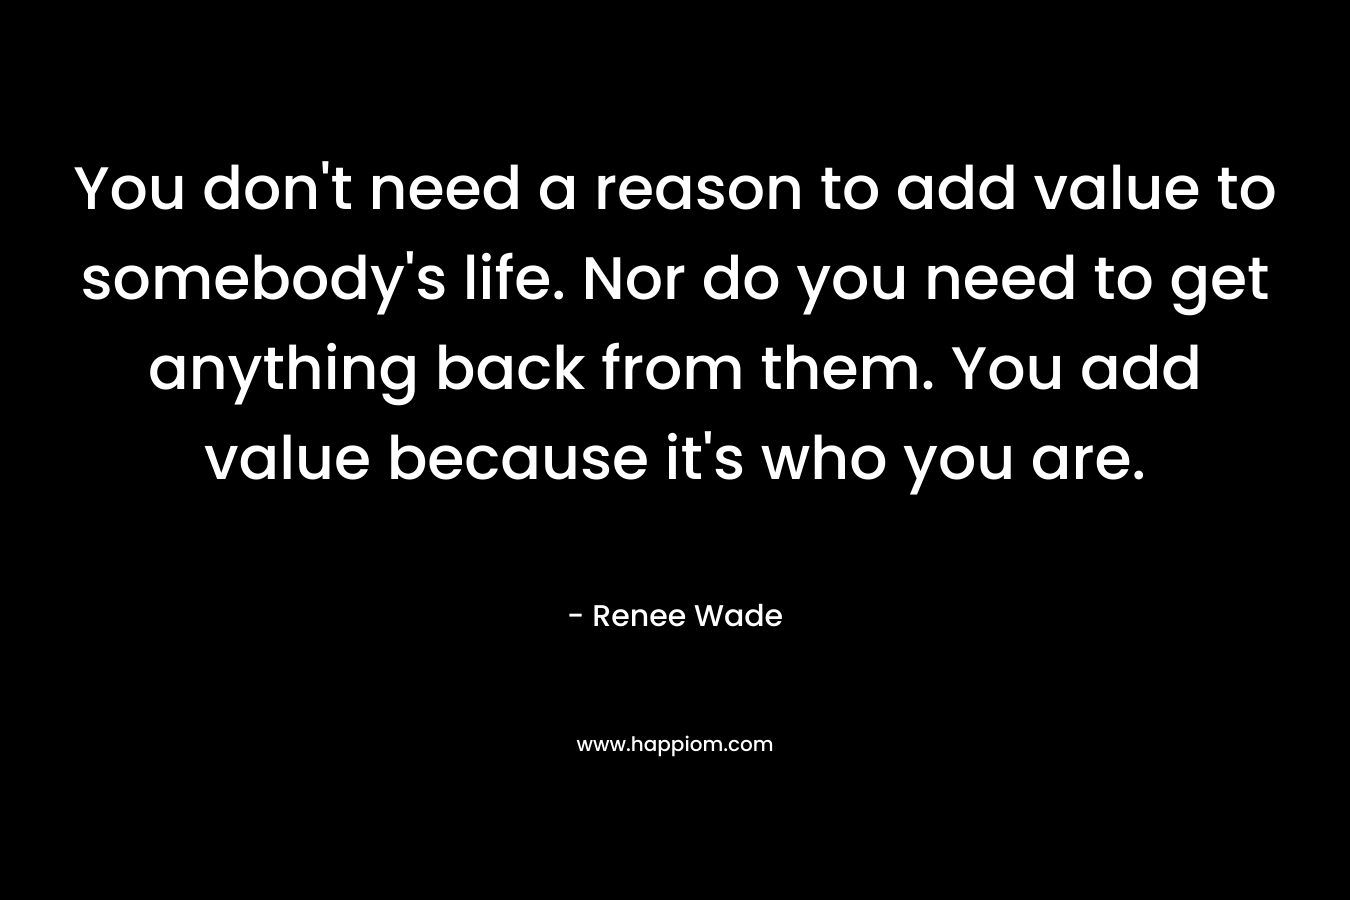 You don’t need a reason to add value to somebody’s life. Nor do you need to get anything back from them. You add value because it’s who you are. – Renee Wade